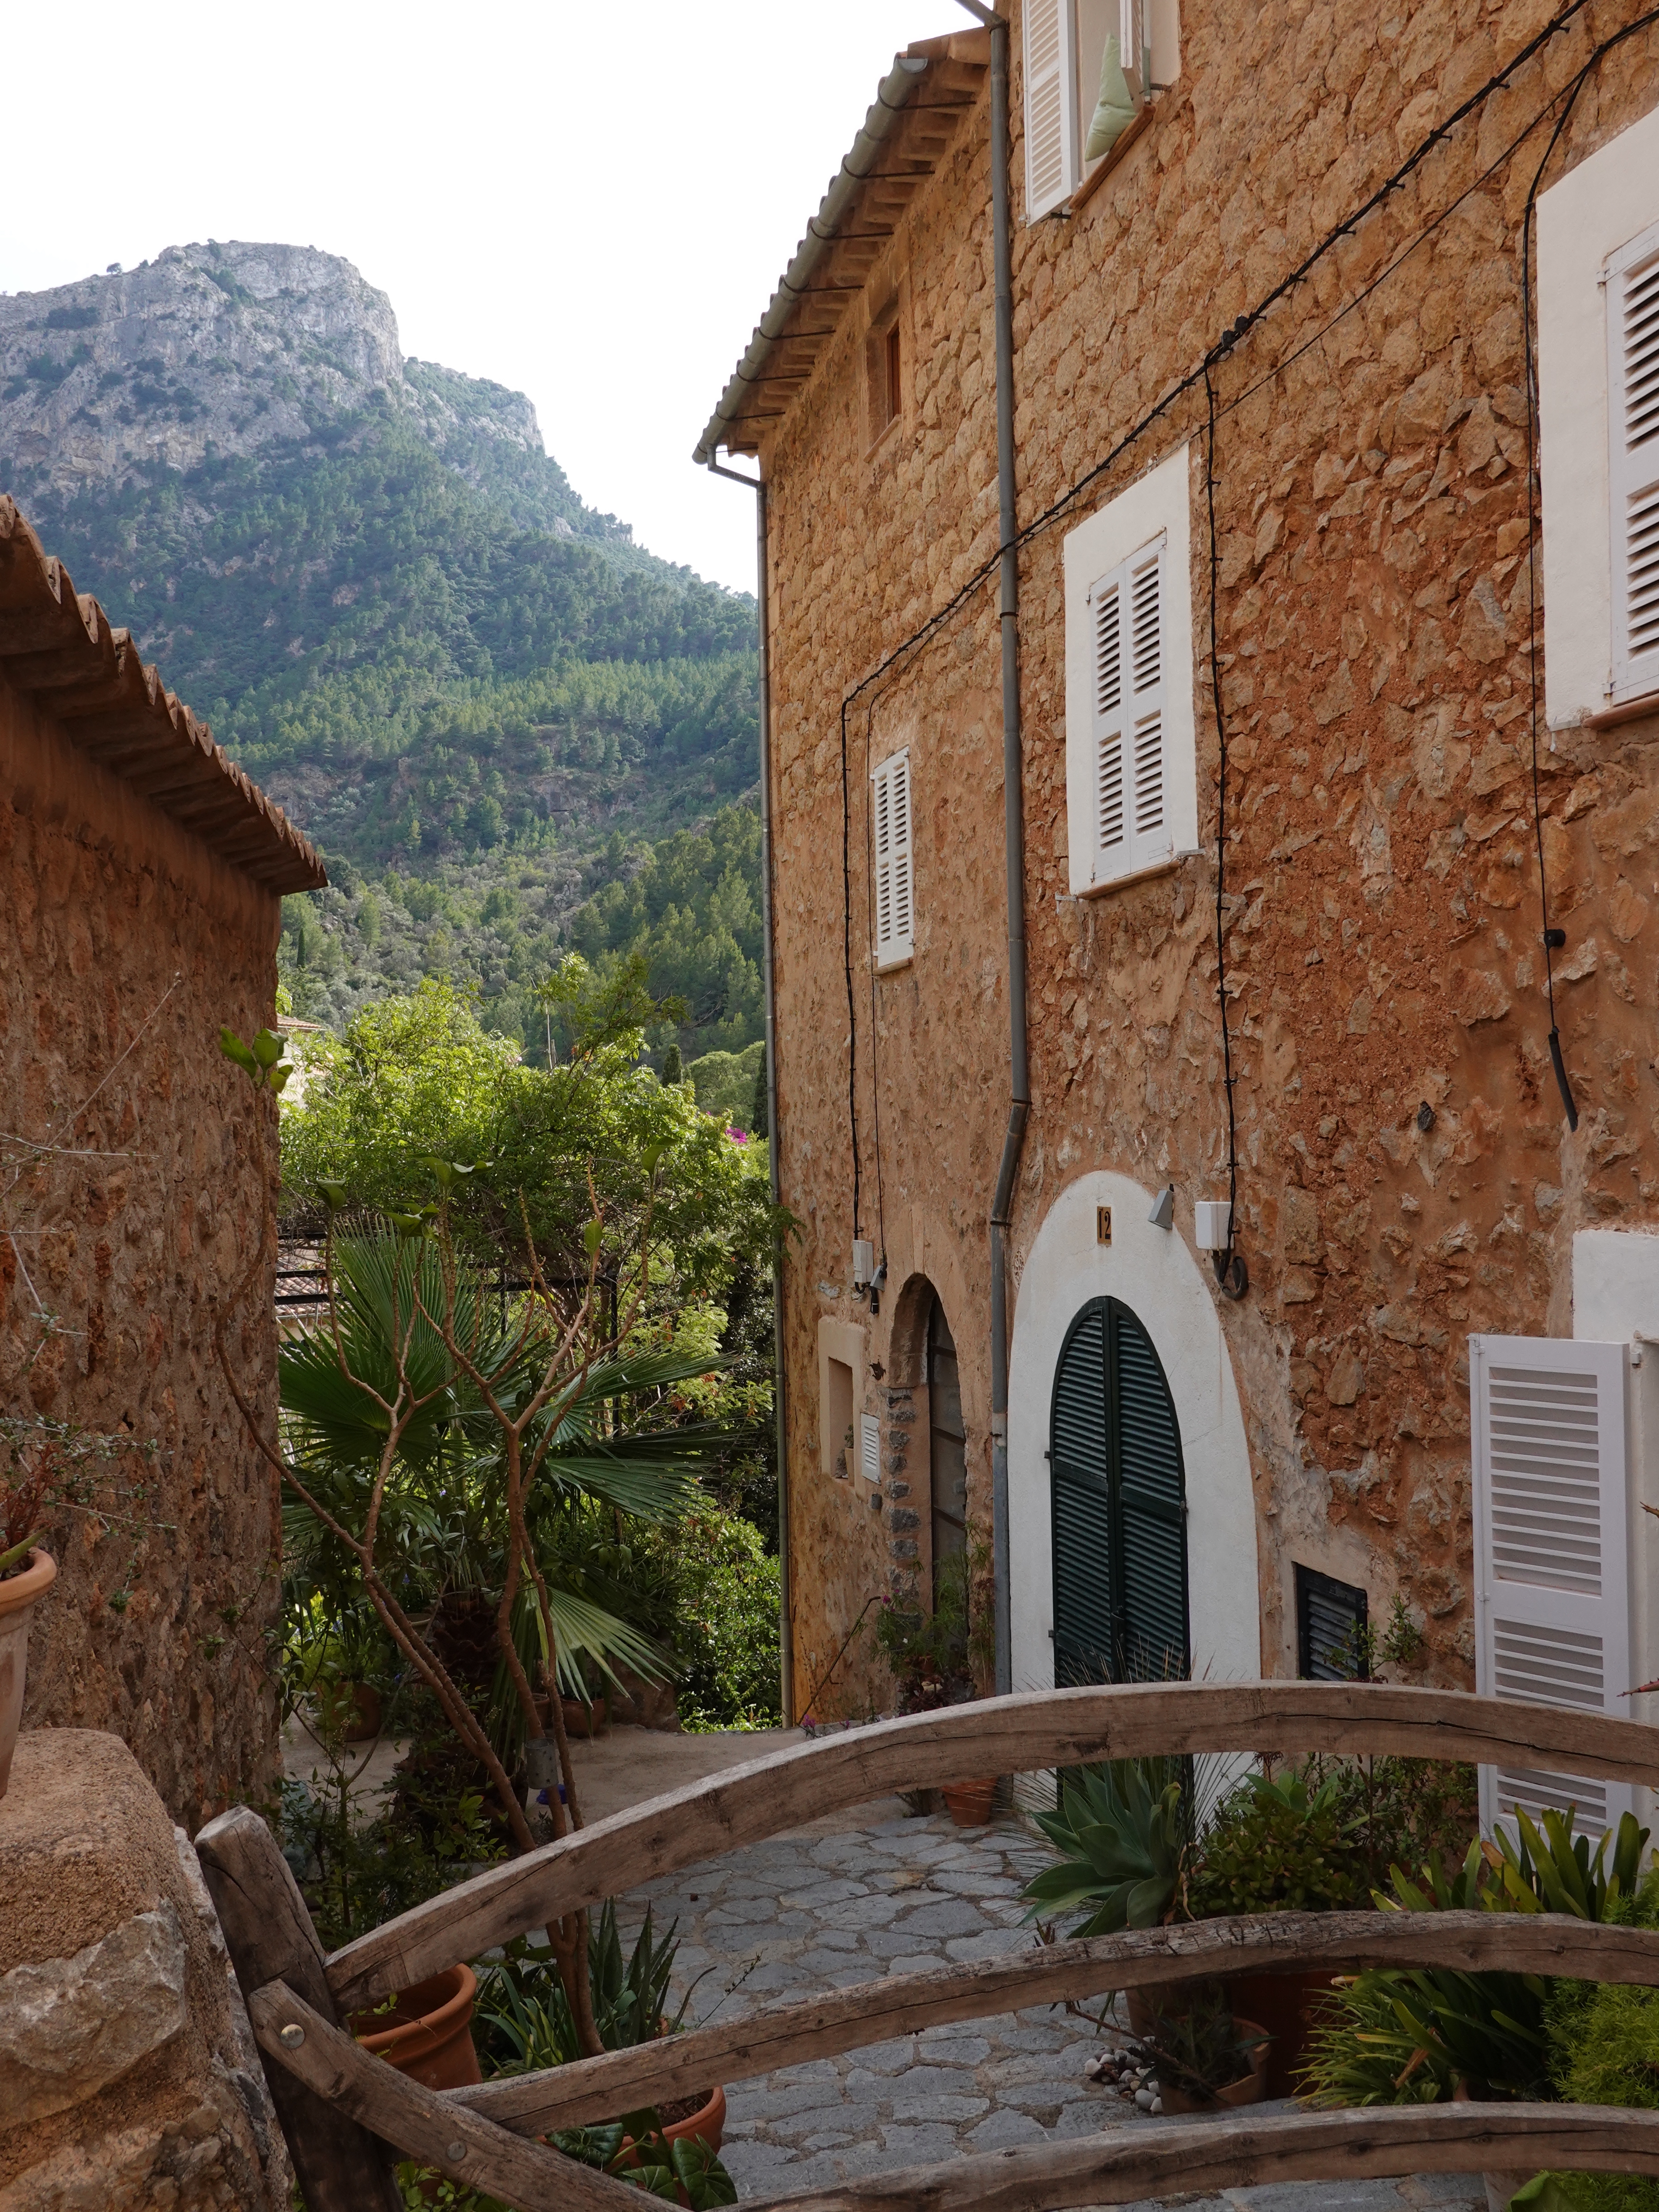 Make sure to get lost in the little streets of Deia, that is where the prettiest houses are hidden. If you go for a morning walk you may end up even alone!